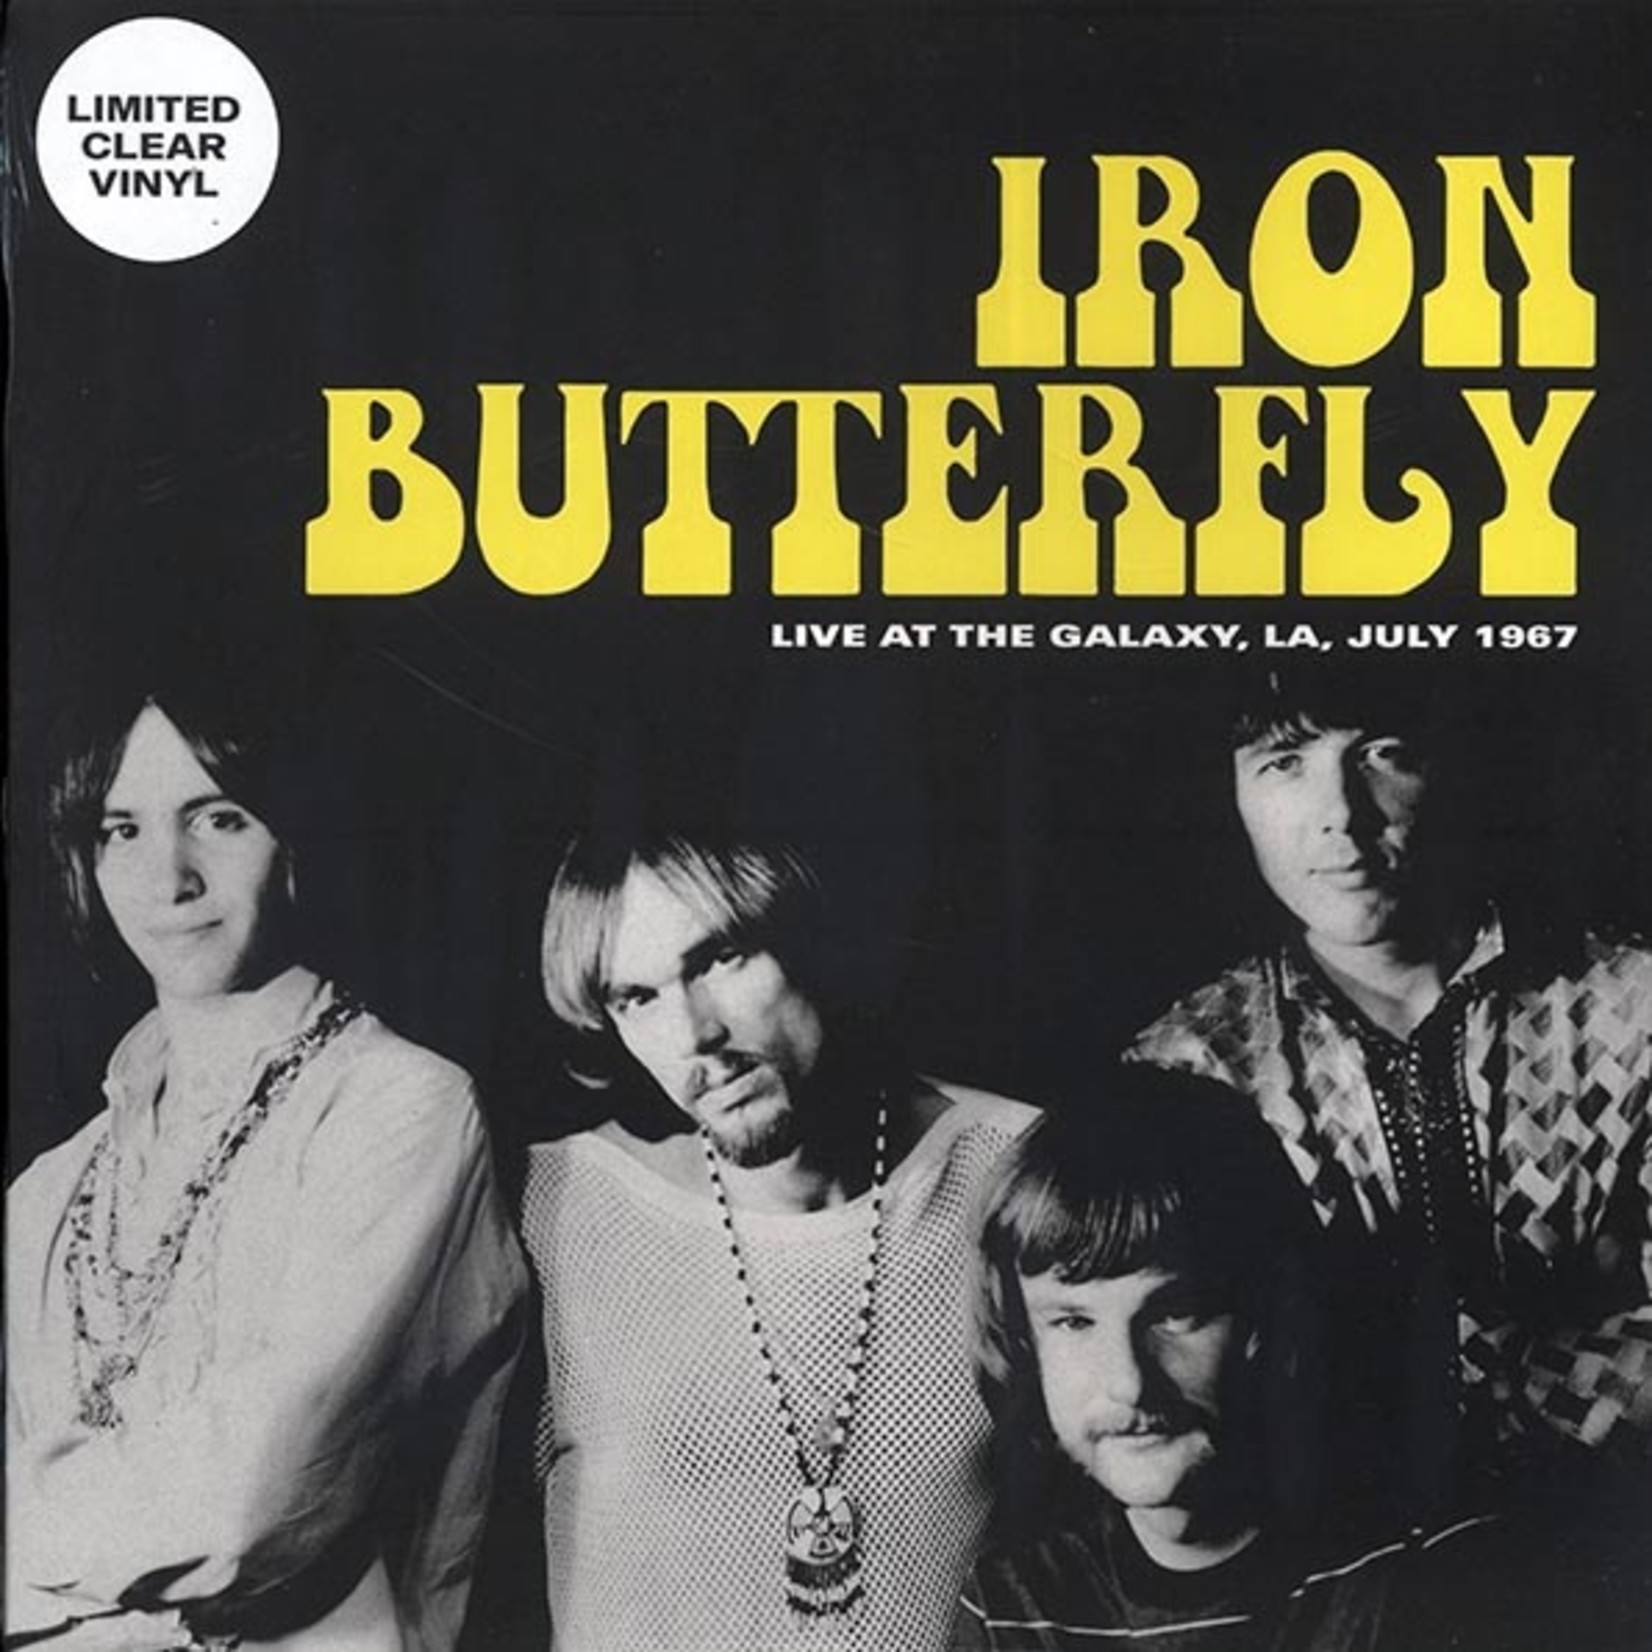 Iron Butterfly - Live At The Galaxy, LA, July 1967 (Outsider) (Ltd. 500 Copies) (Colored vinyl (clear))